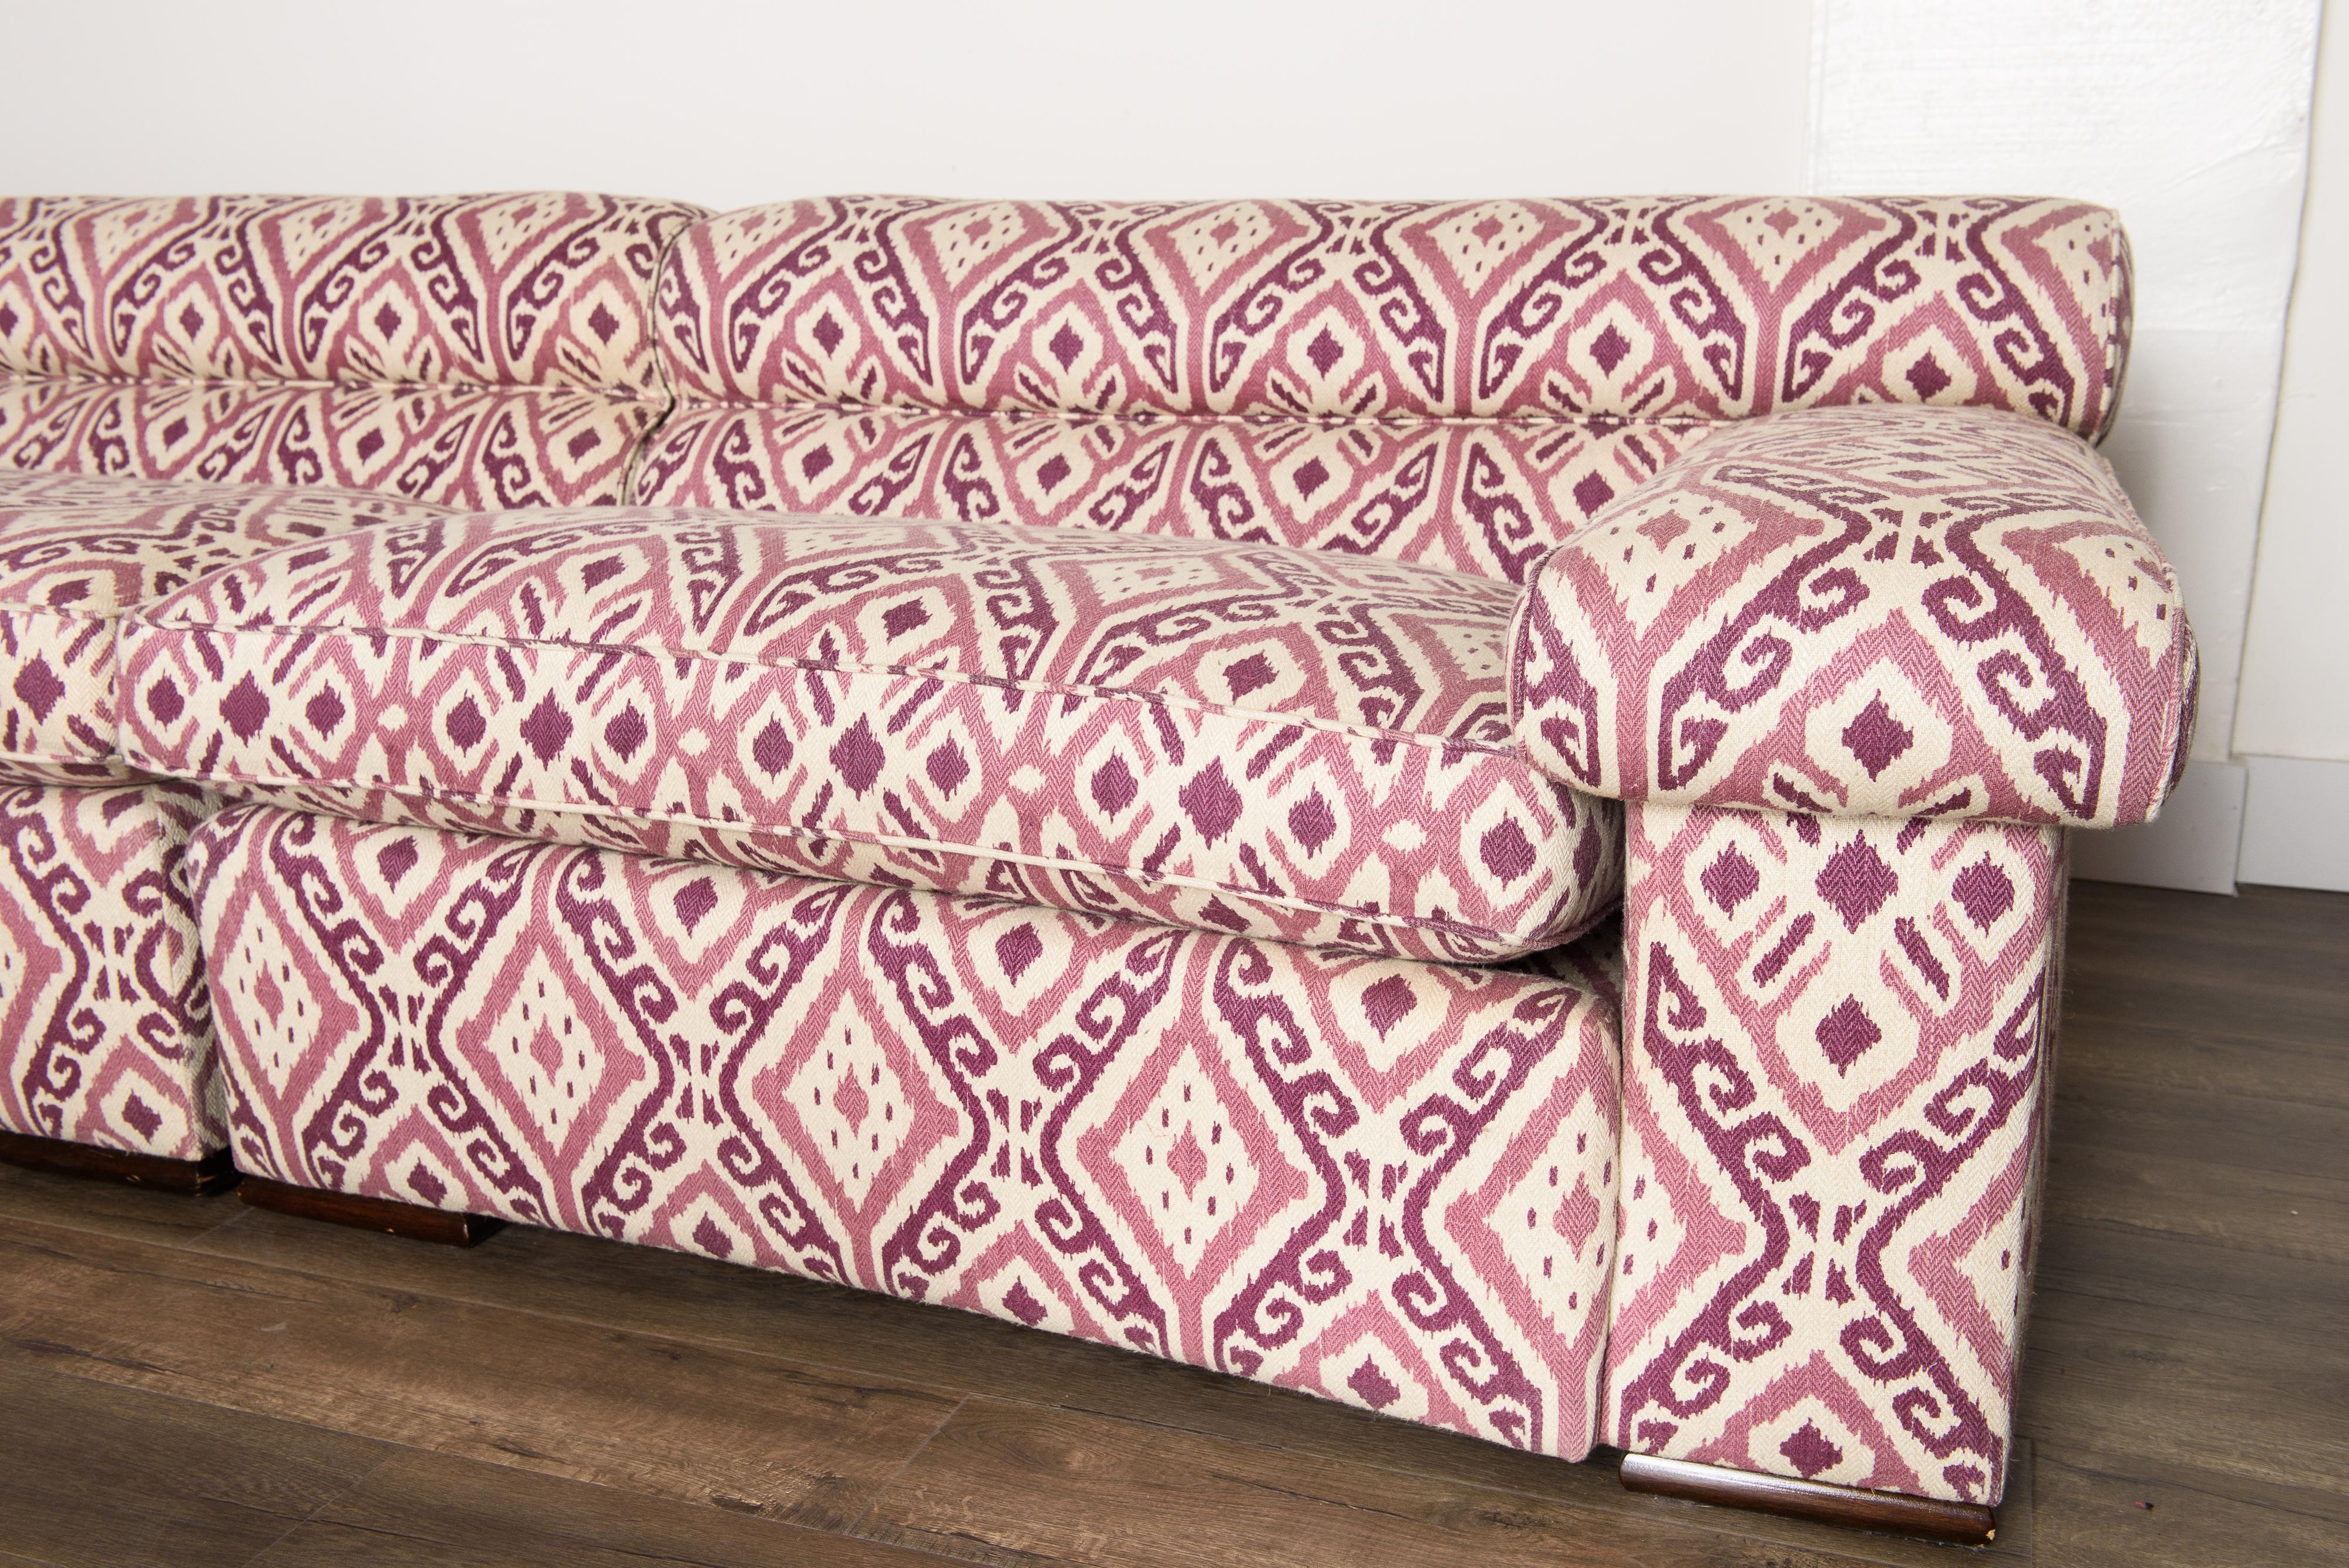 Paul Laszlo Attributed Curved Sectional Sofa Reupholstered in Pink Ikat Fabric For Sale 10